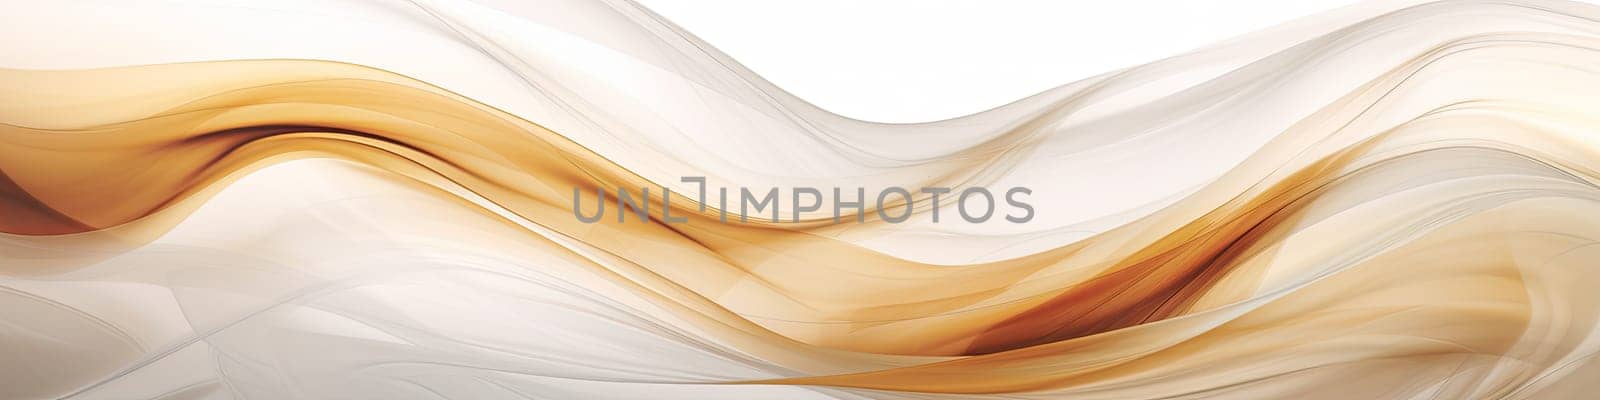 Banner of an abstract white and brown, gold textile transparent fabric as background or texture by Kadula